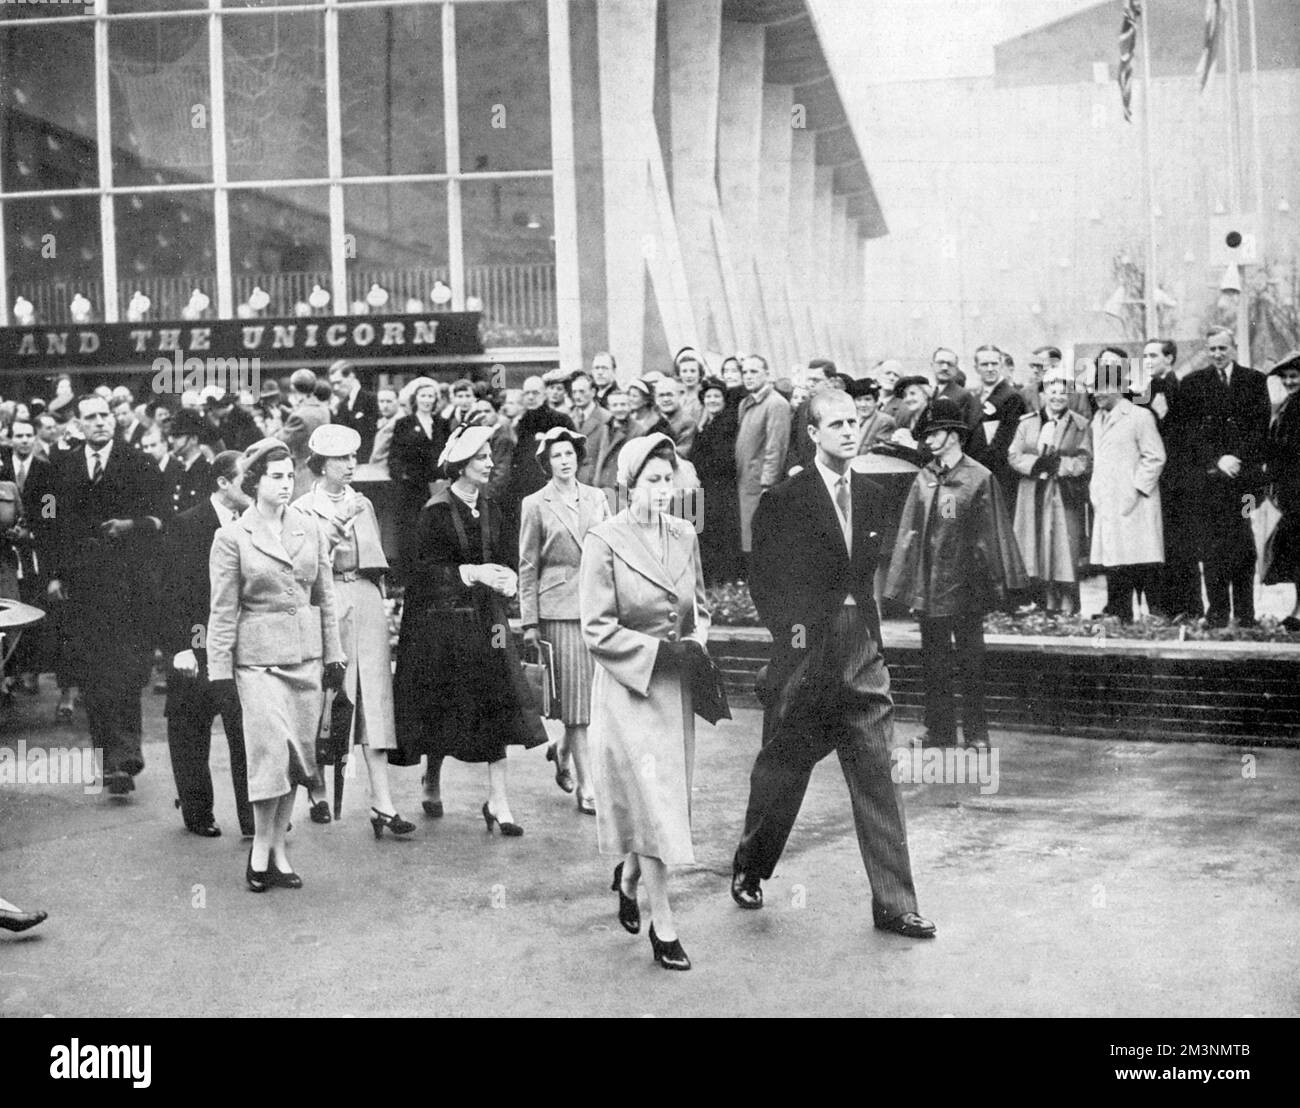 Princess Elizabeth (Queen Elizabeth II) and Prince Philip, Duke of Edinburgh pictured on their tour of the Festival of Britain site on the South Bank, London in May 1951.  Behind them follow Princess Marina, Duchess of Kent, her sister Princess Olga, Olga's daughter Princess Elizabeth and Princess Alexandra of Kent.  Rising in the background is the Lion and the Unicorn Pavilion.     Date: 1951 Stock Photo